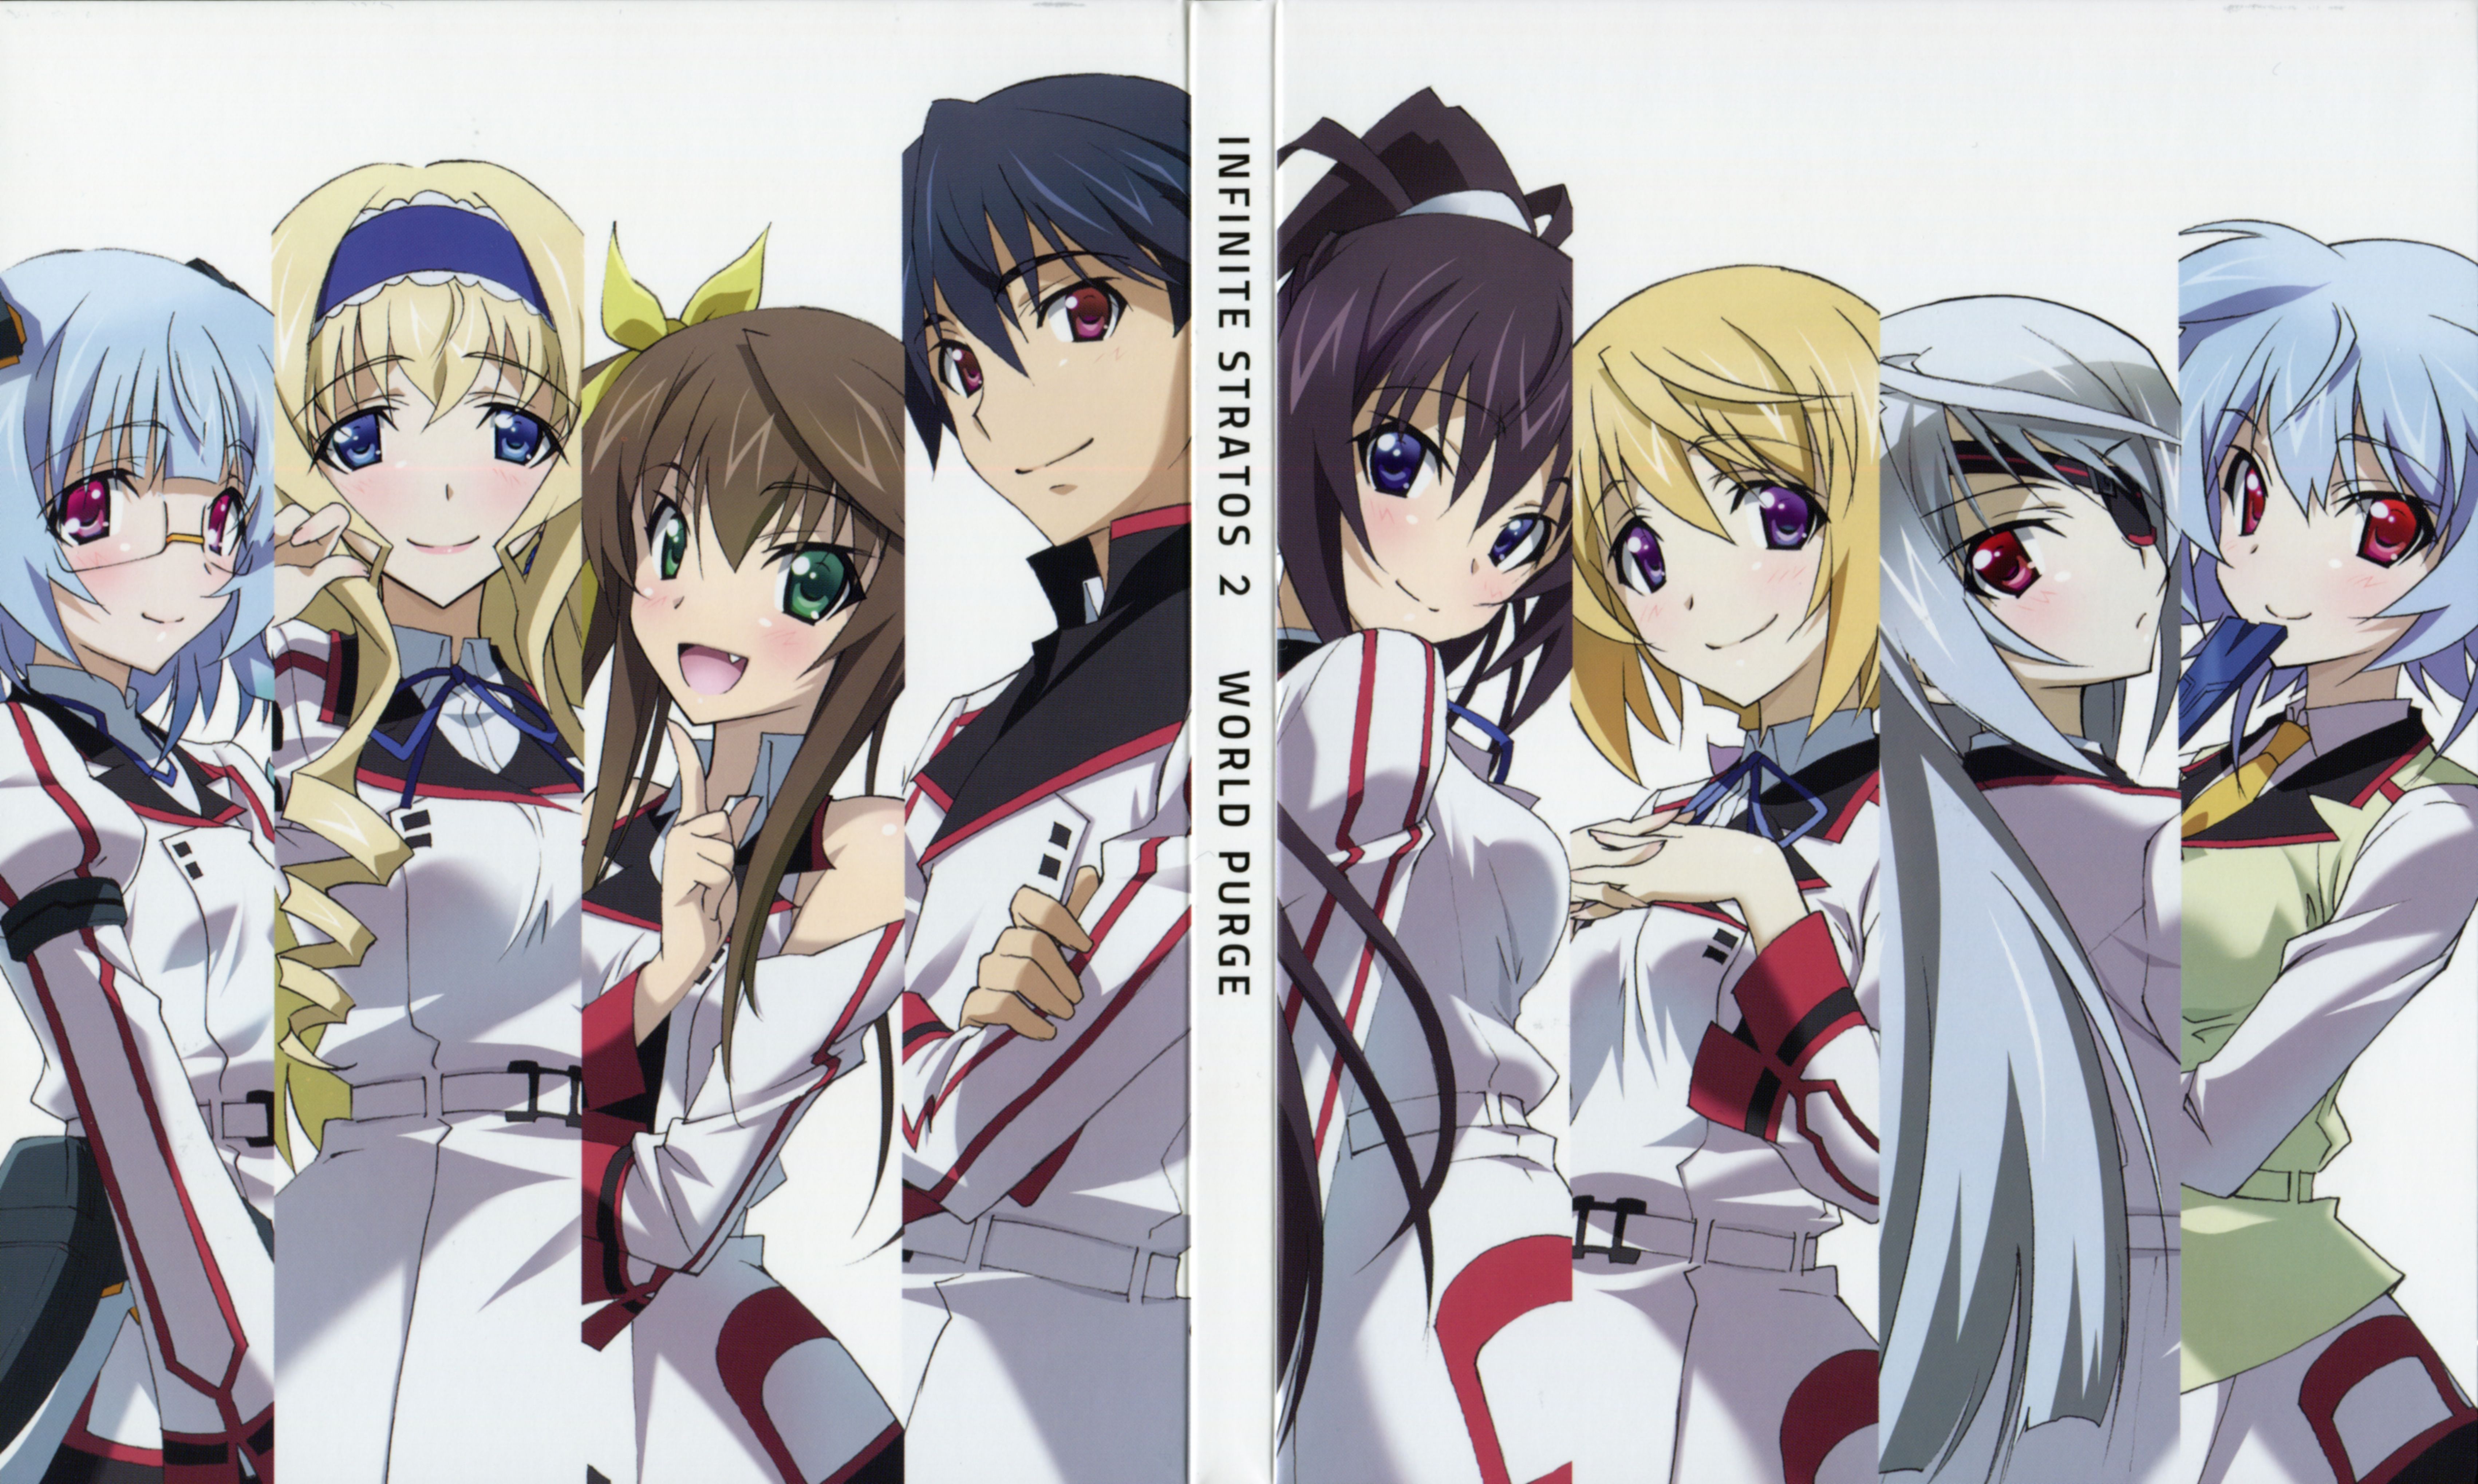 Infinite Stratos Characters Wallpapers Wallpaper Cave